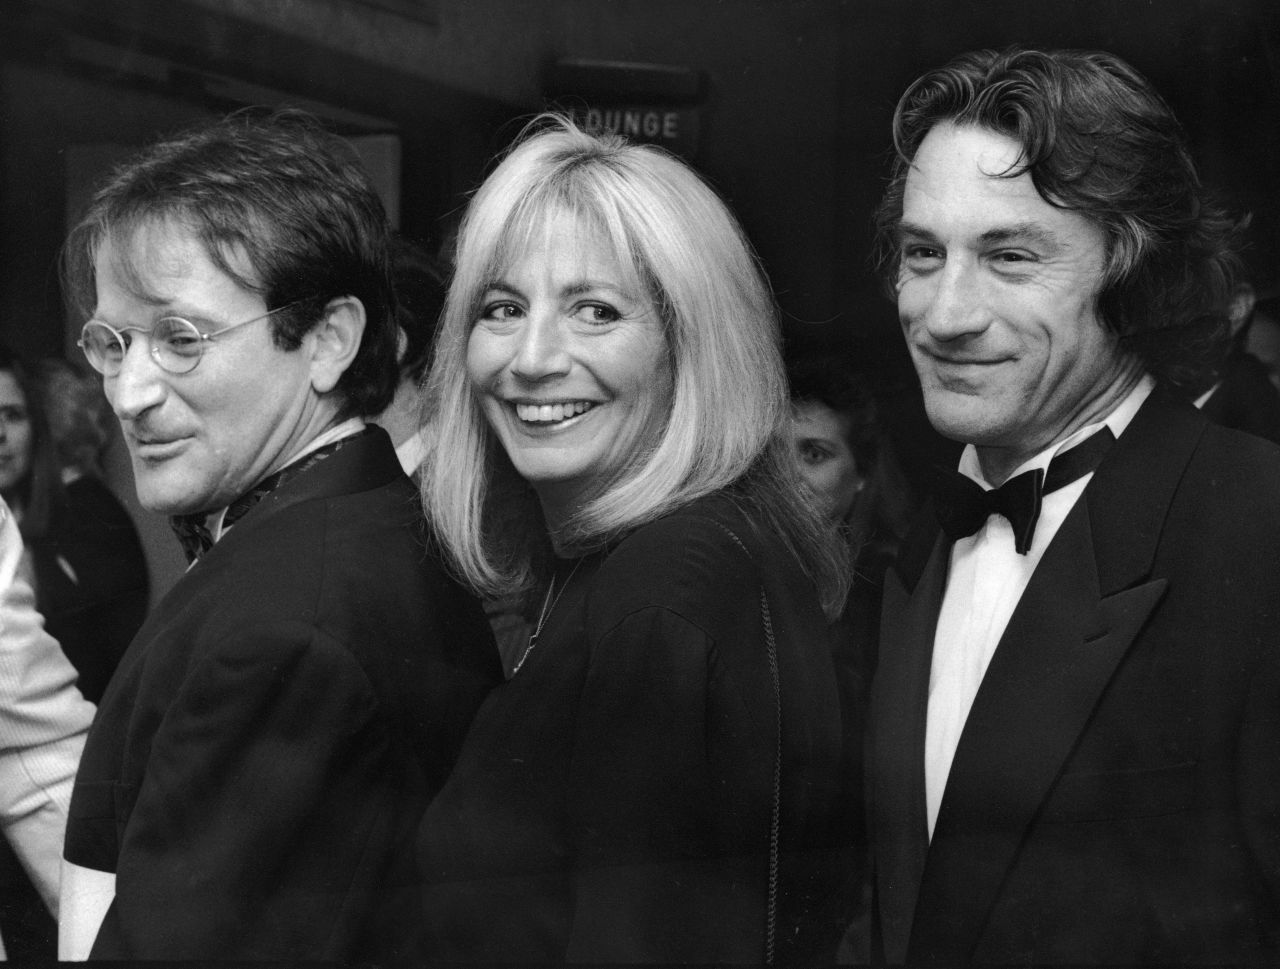 De Niro attends the 1990 premiere of "Awakenings" with director Penny Marshall and actor Robin Williams. 